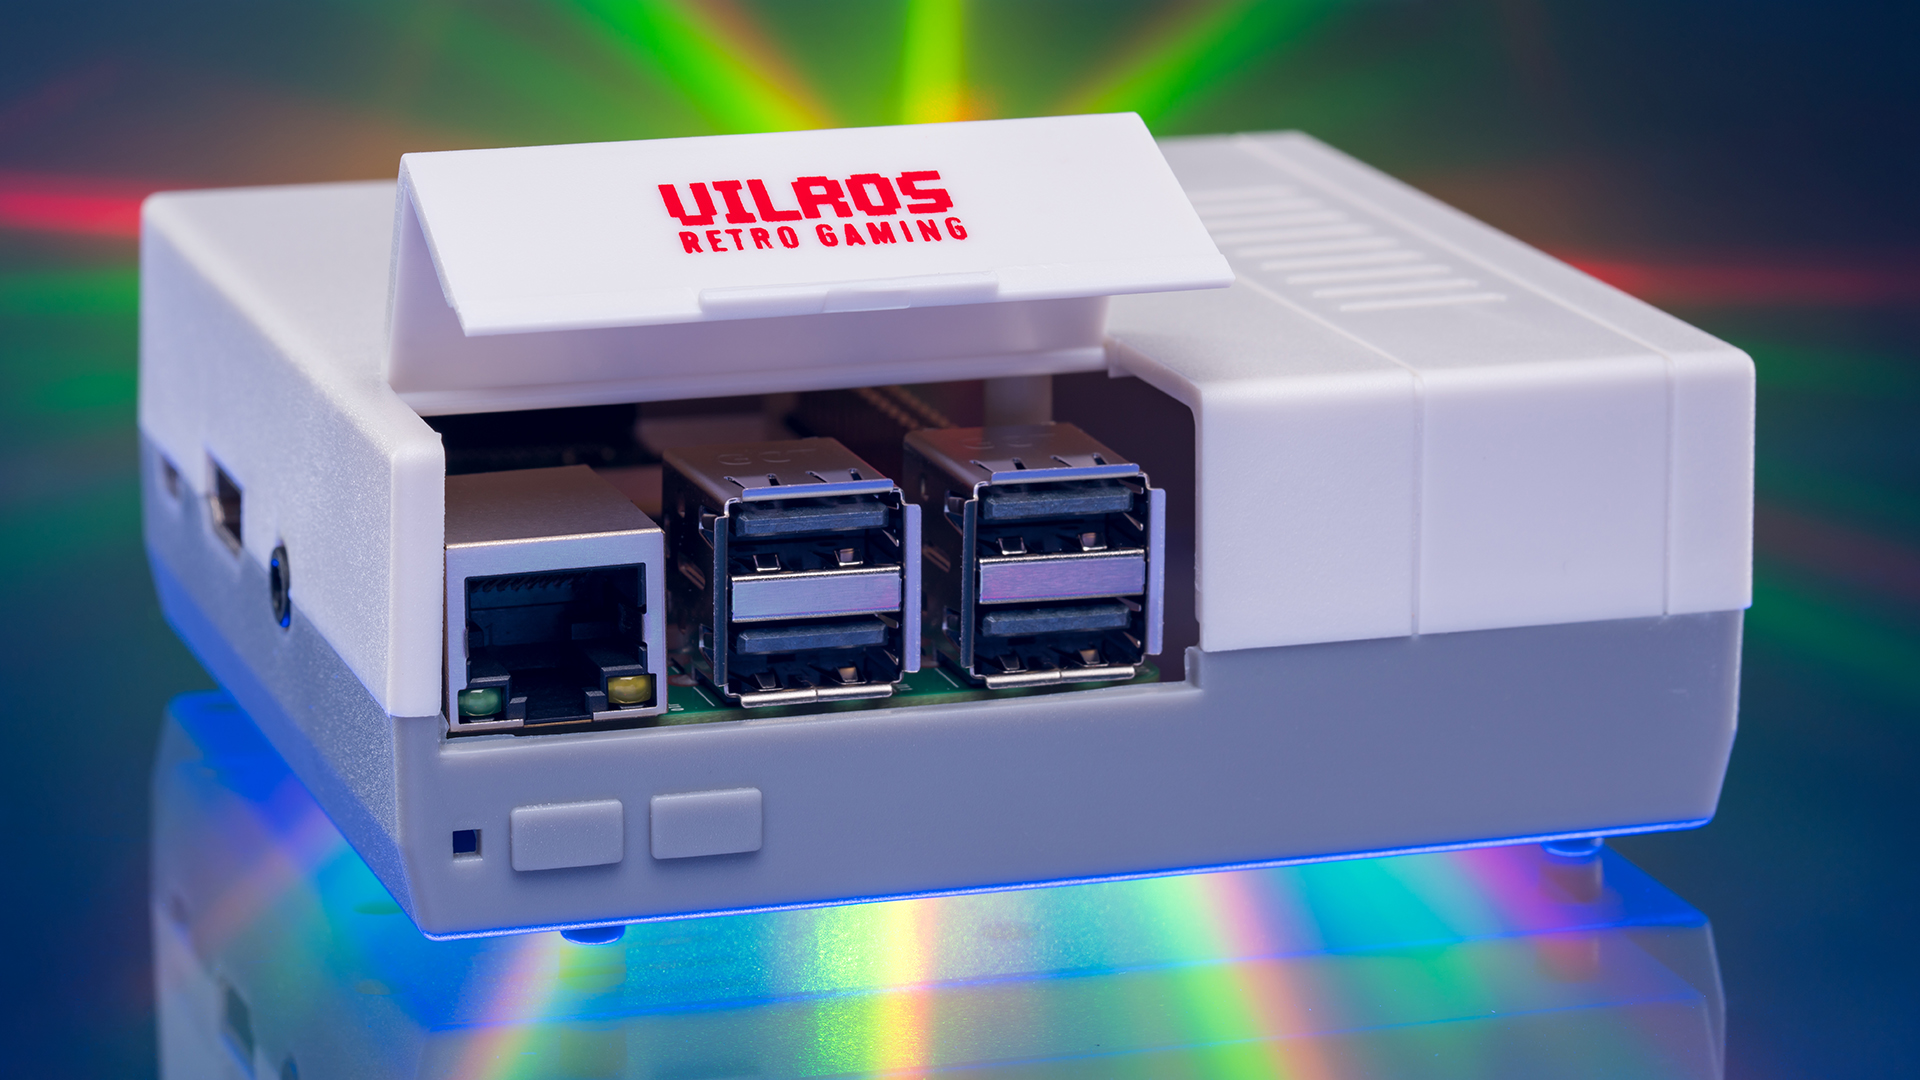 Vilros' Raspberry Pi retro gaming kits are a great option for a retropie console